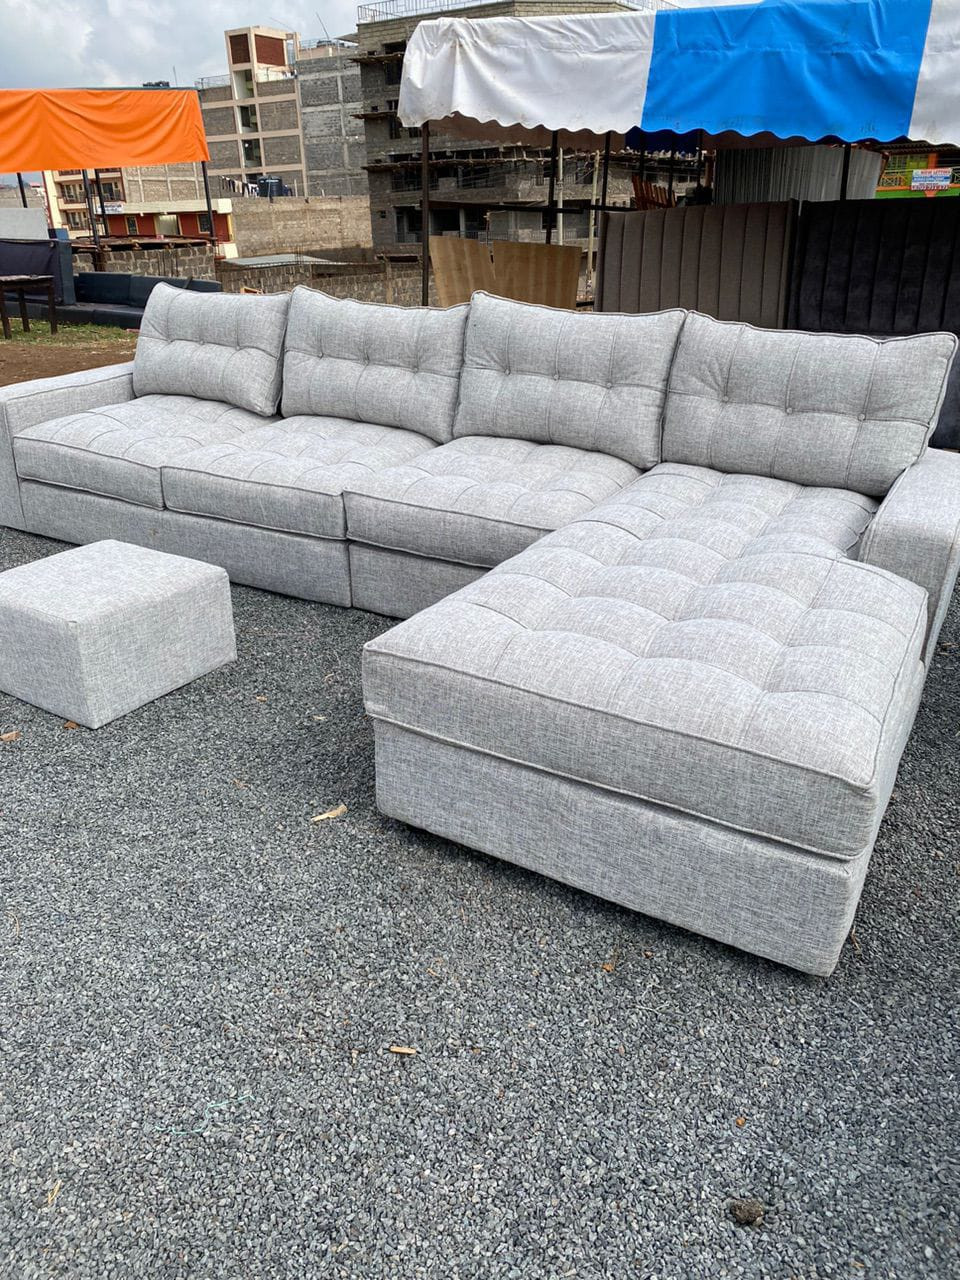 Lshaped 7 seater sectional sofa